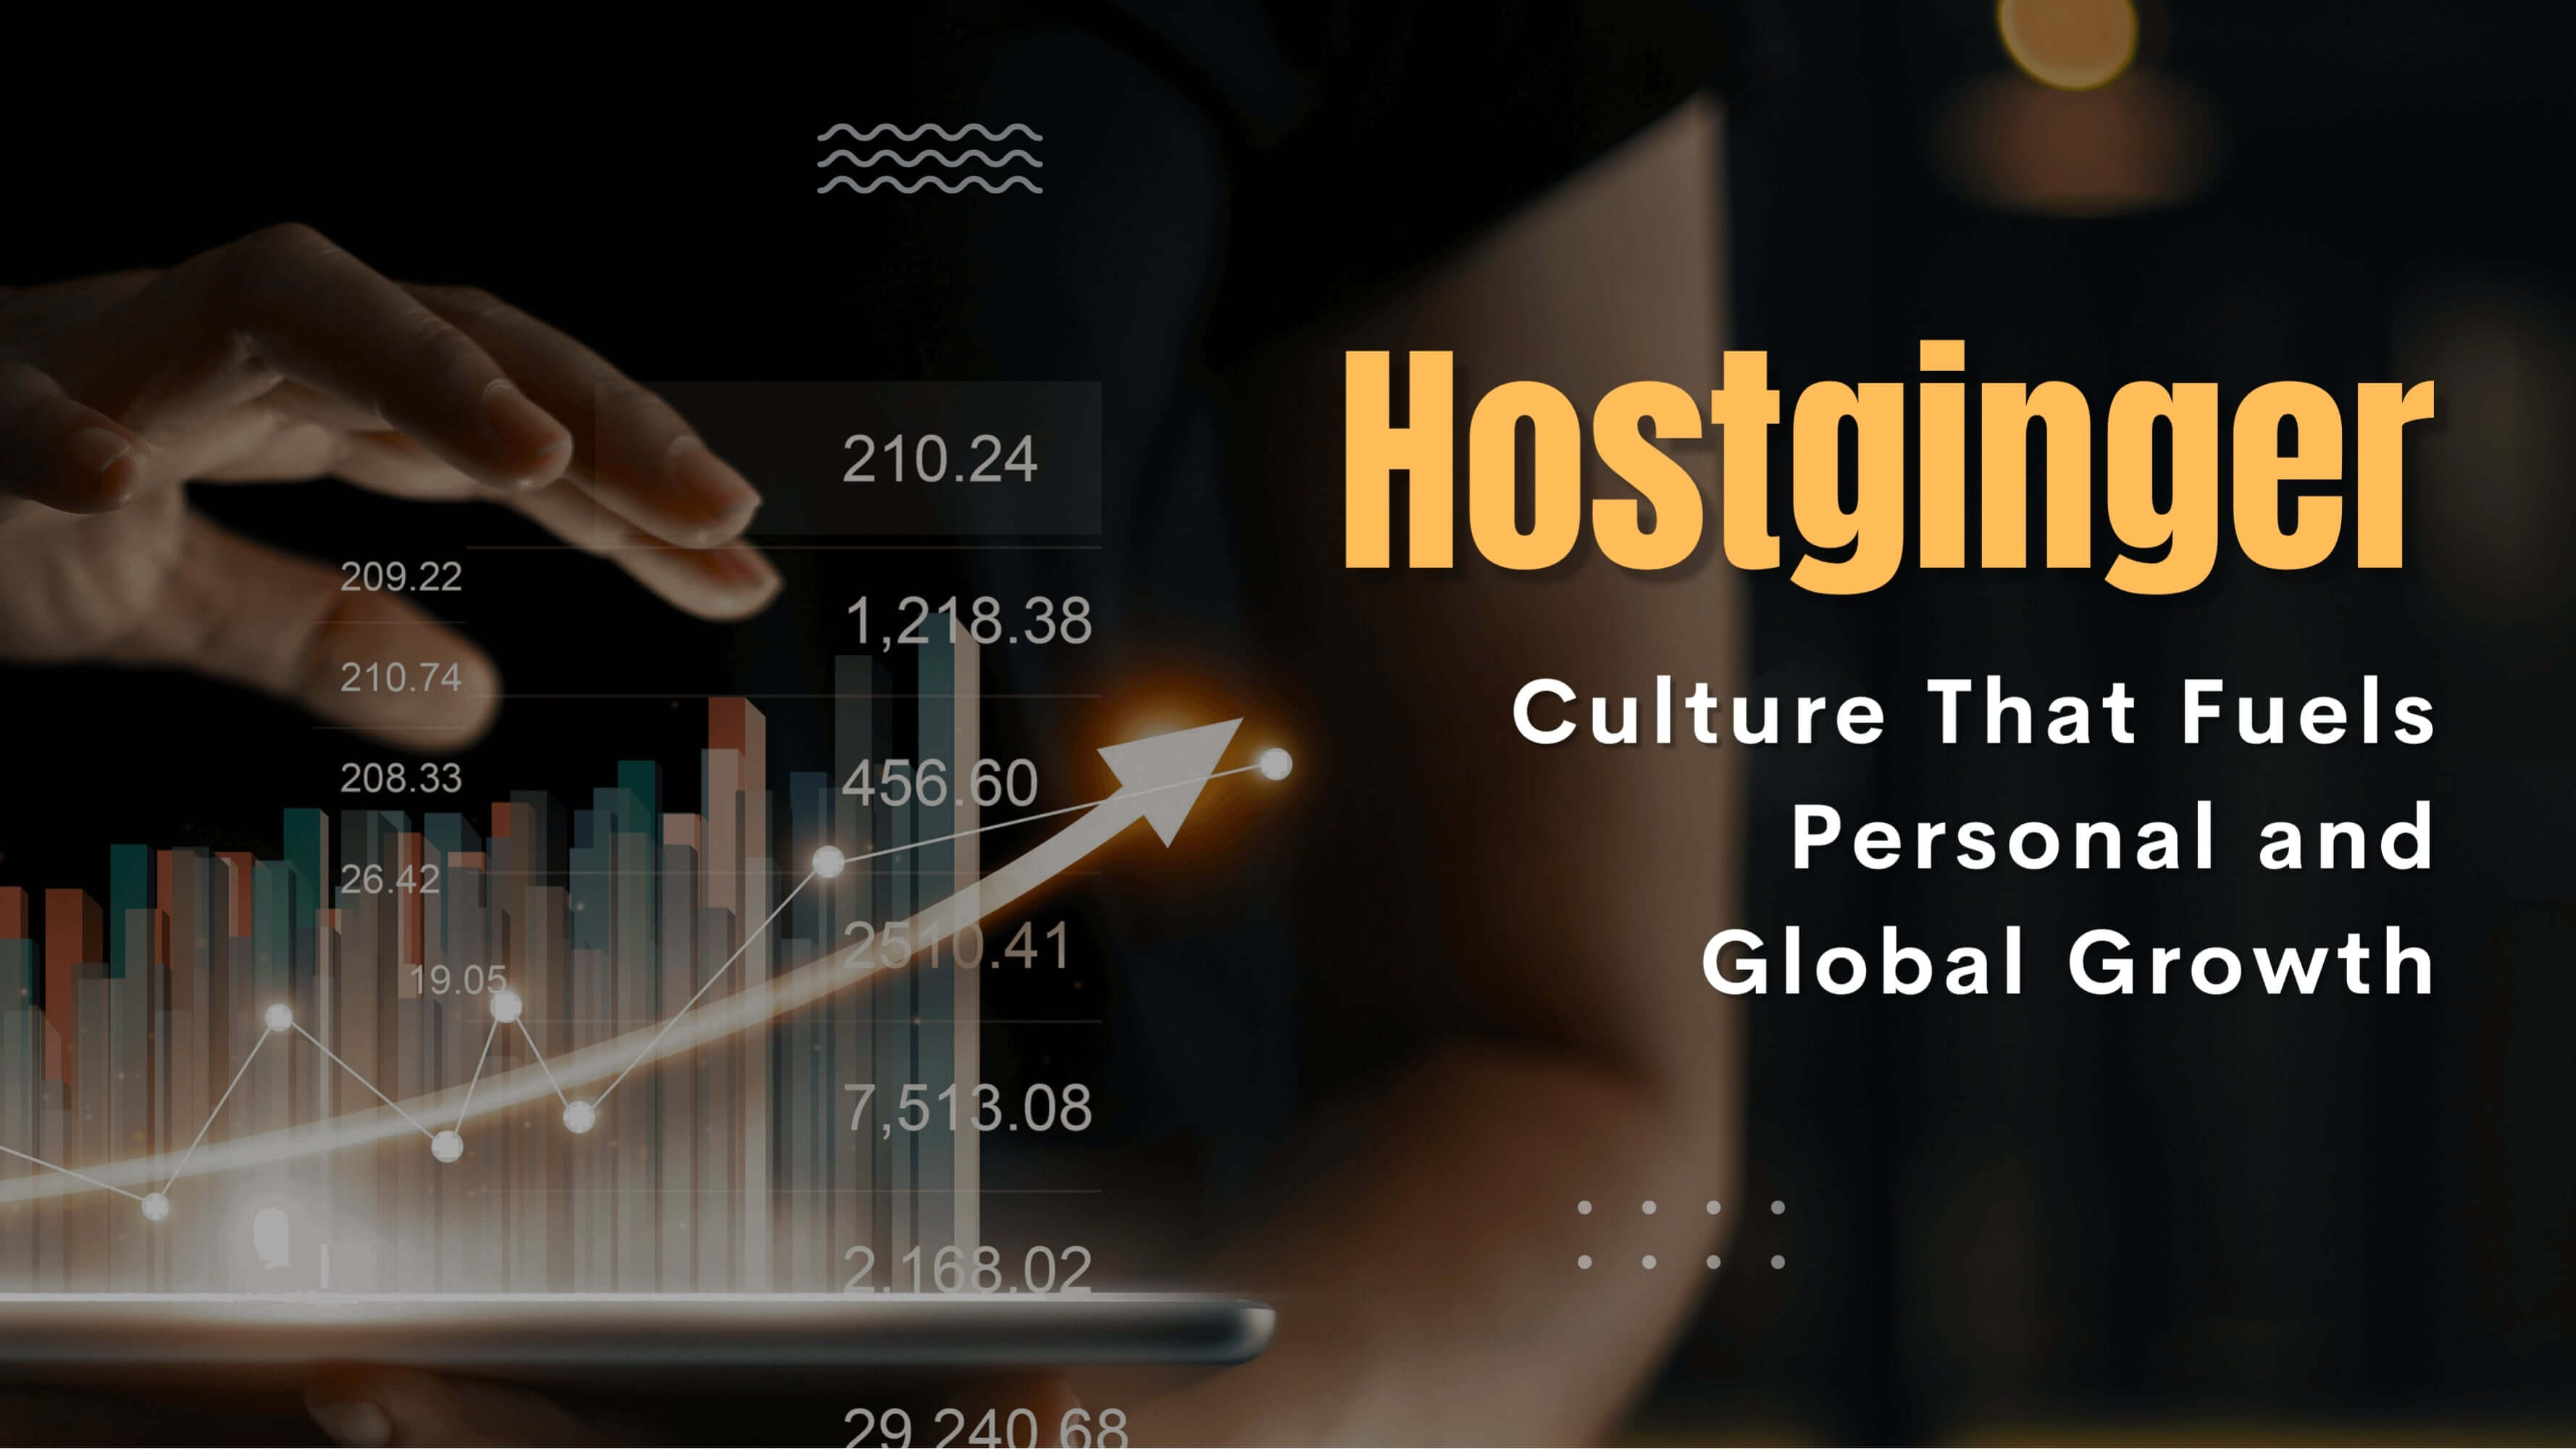 Hostginger Culture That Fuels Personal and Global Growth